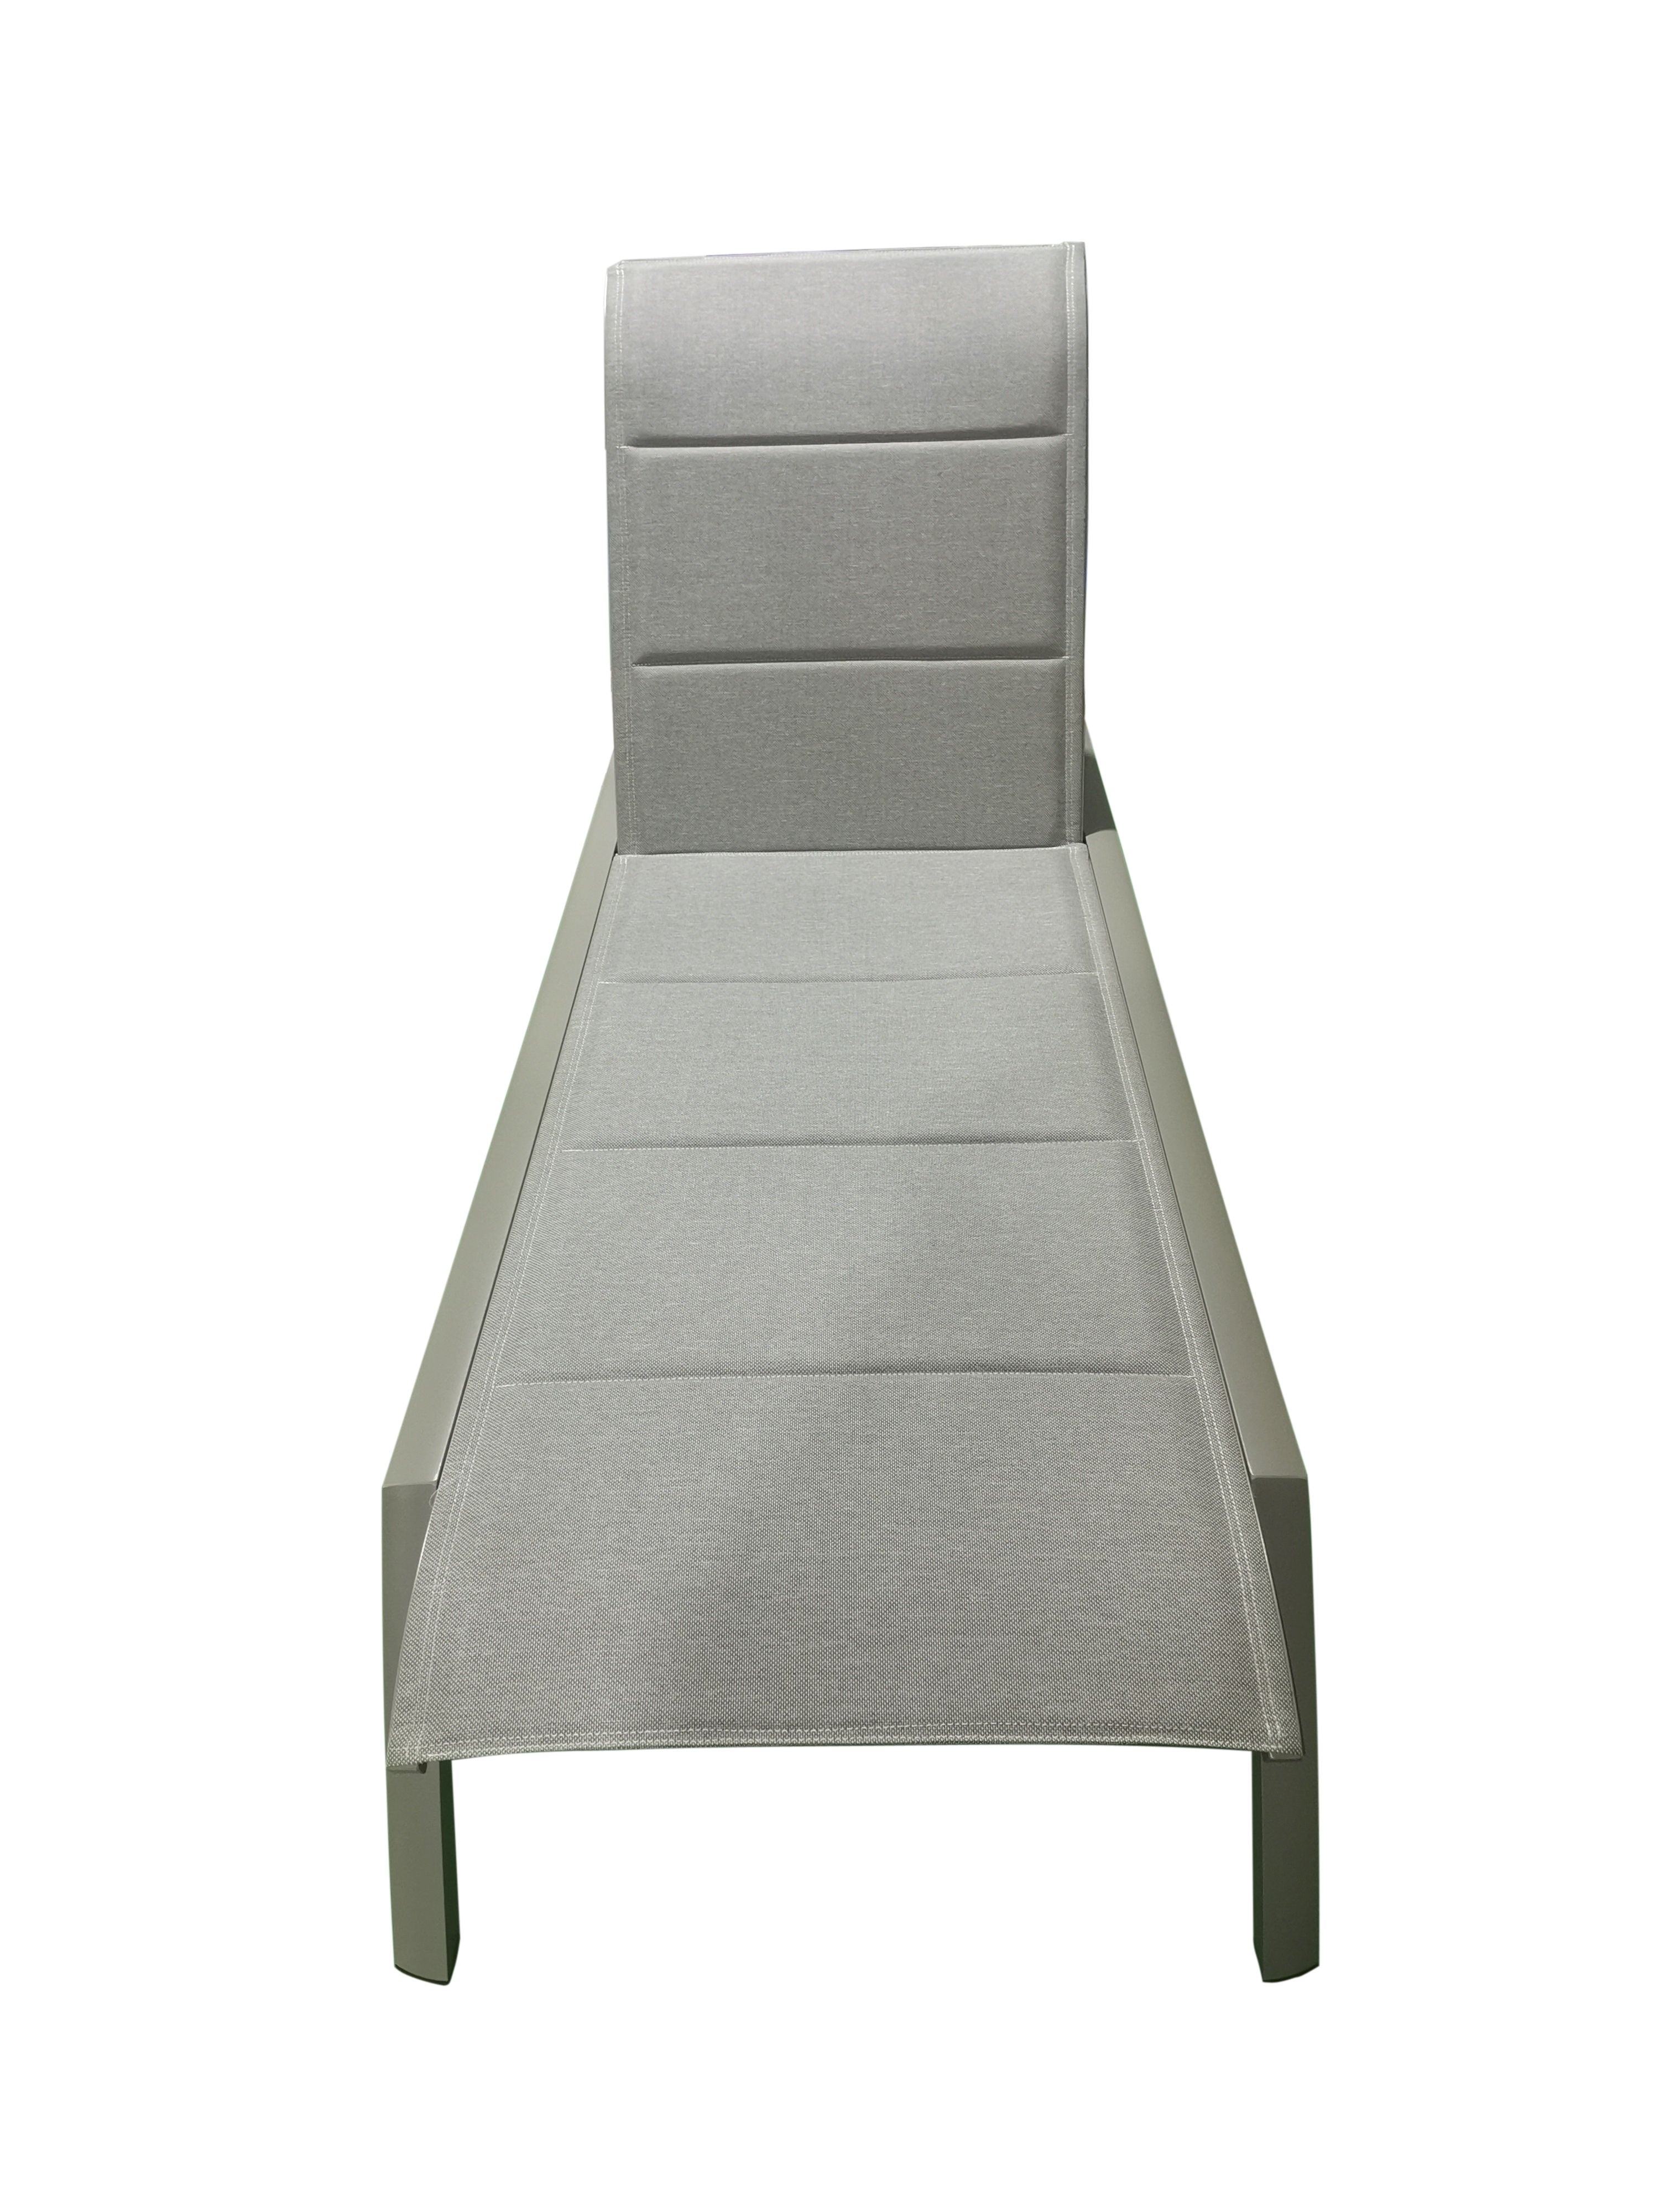 MOSS MOSS-0445TMA - Akumal Collection, Taupe matte aluminum reclining & stackable lounger chair with convenient small back wheels & with taupe mix quick dry padded textilene 28 1/2" x 80" x H 14"